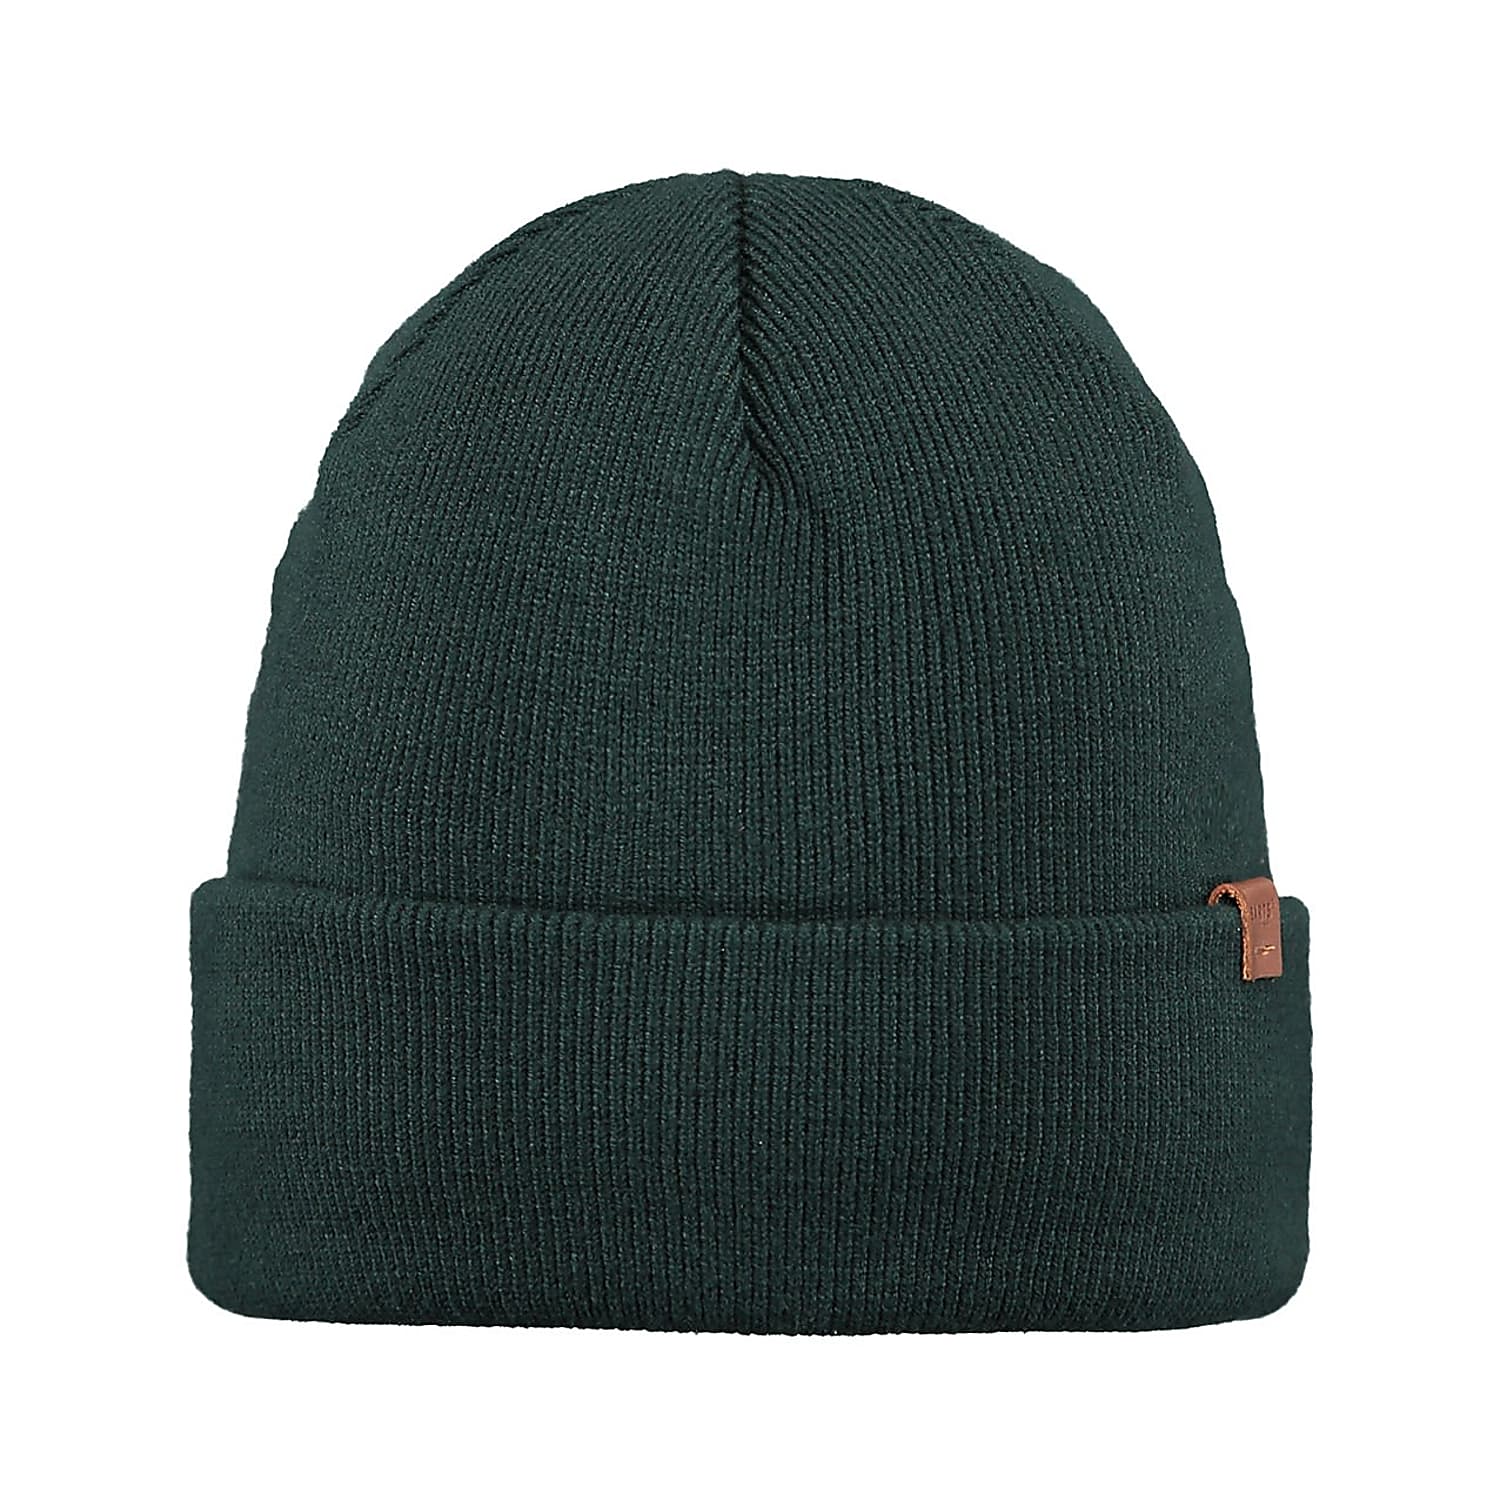 Bottle Barts WILLES - M cheap BEANIE, shipping Green and Fast